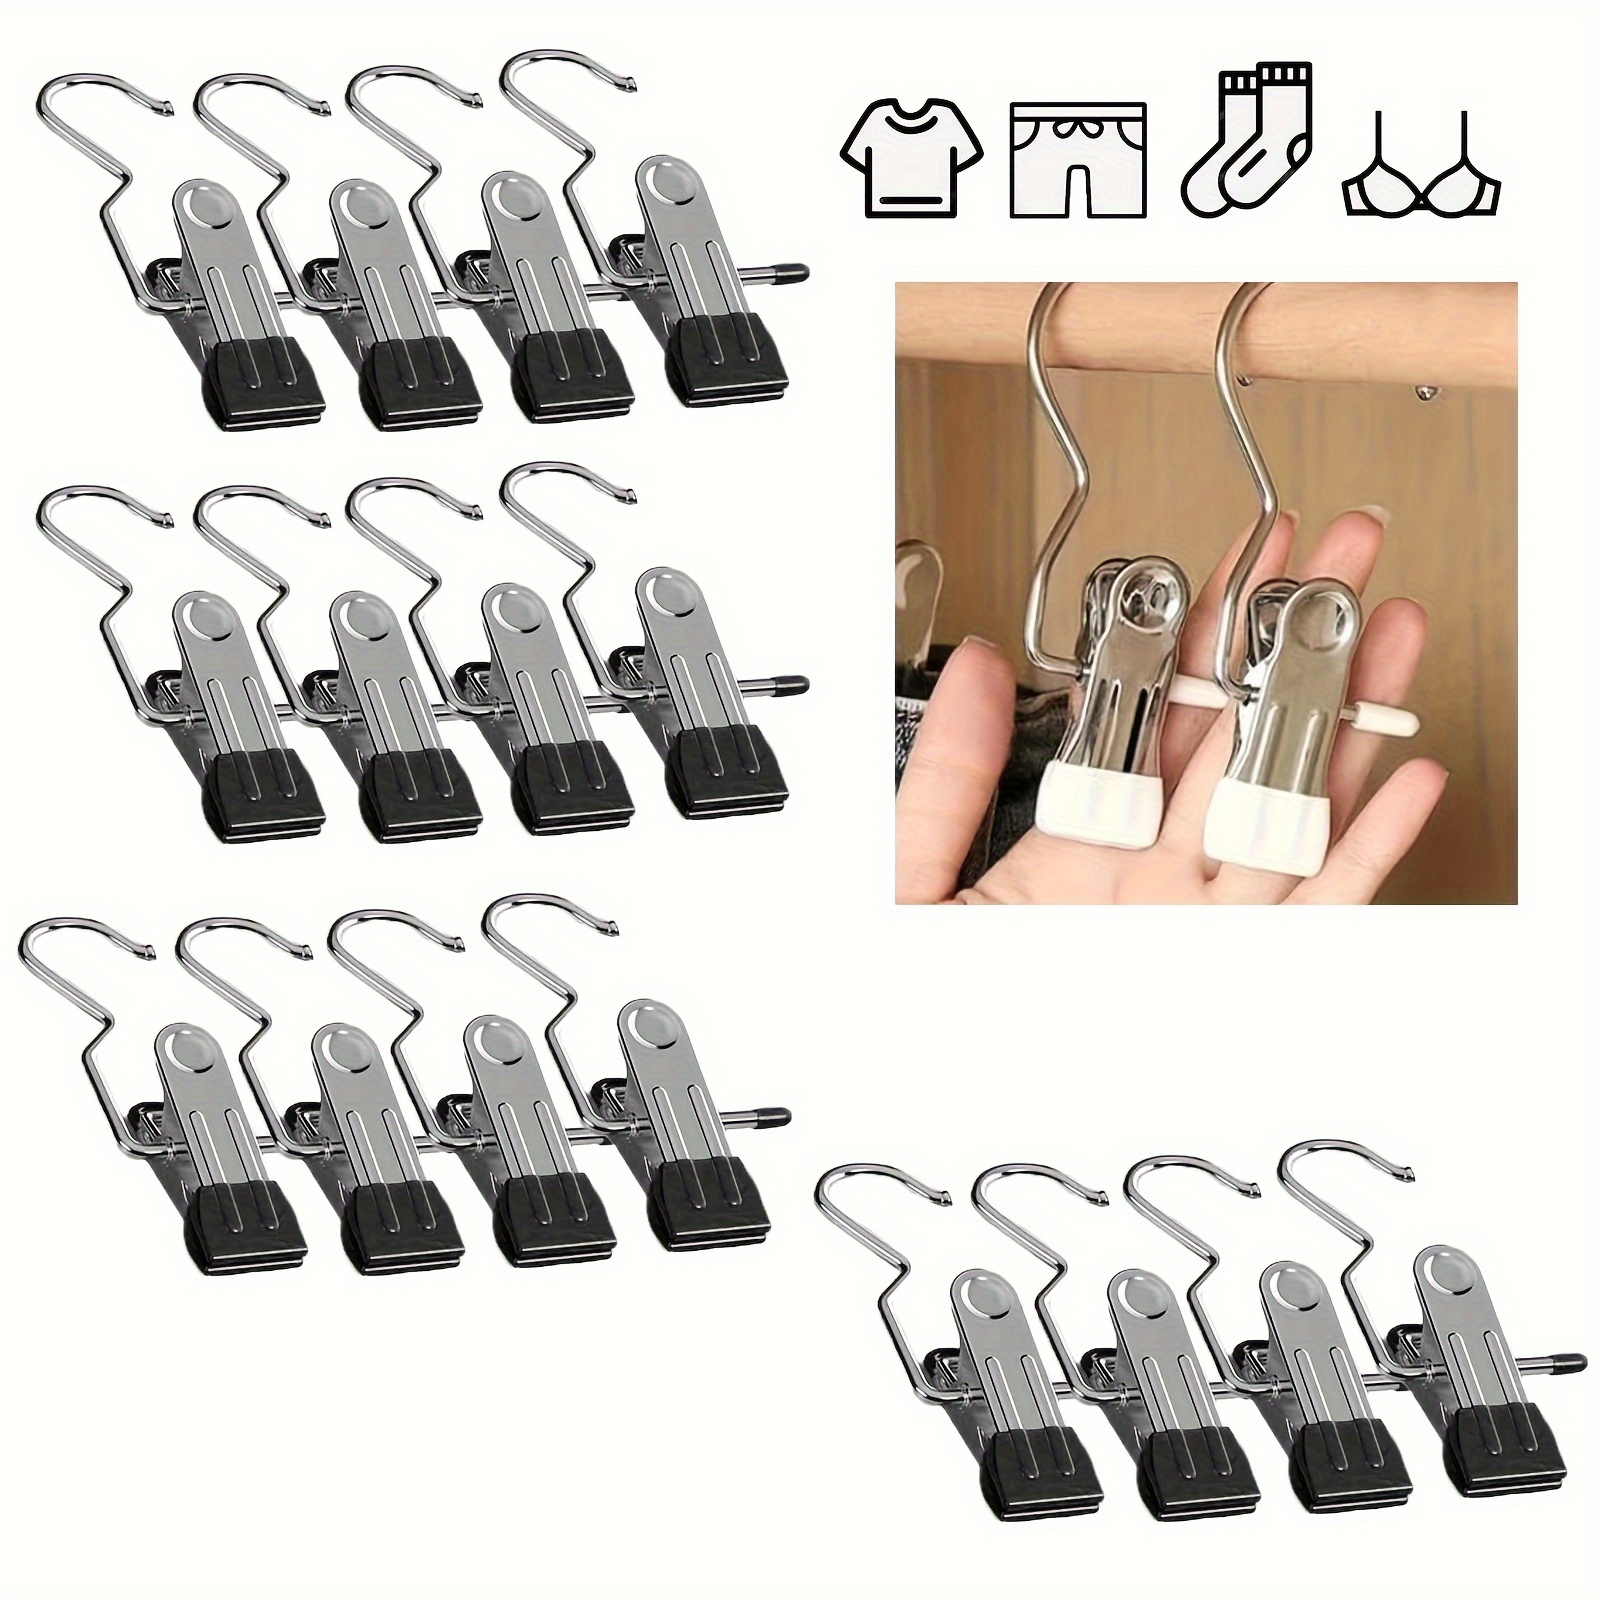 12pcs Space Savers Organizers Hanger Connector Hooks, Hanger Connecting  Hooks Multifunctional Wardrobe Drying Hanger for Plastic Hangers Exhale  Spring